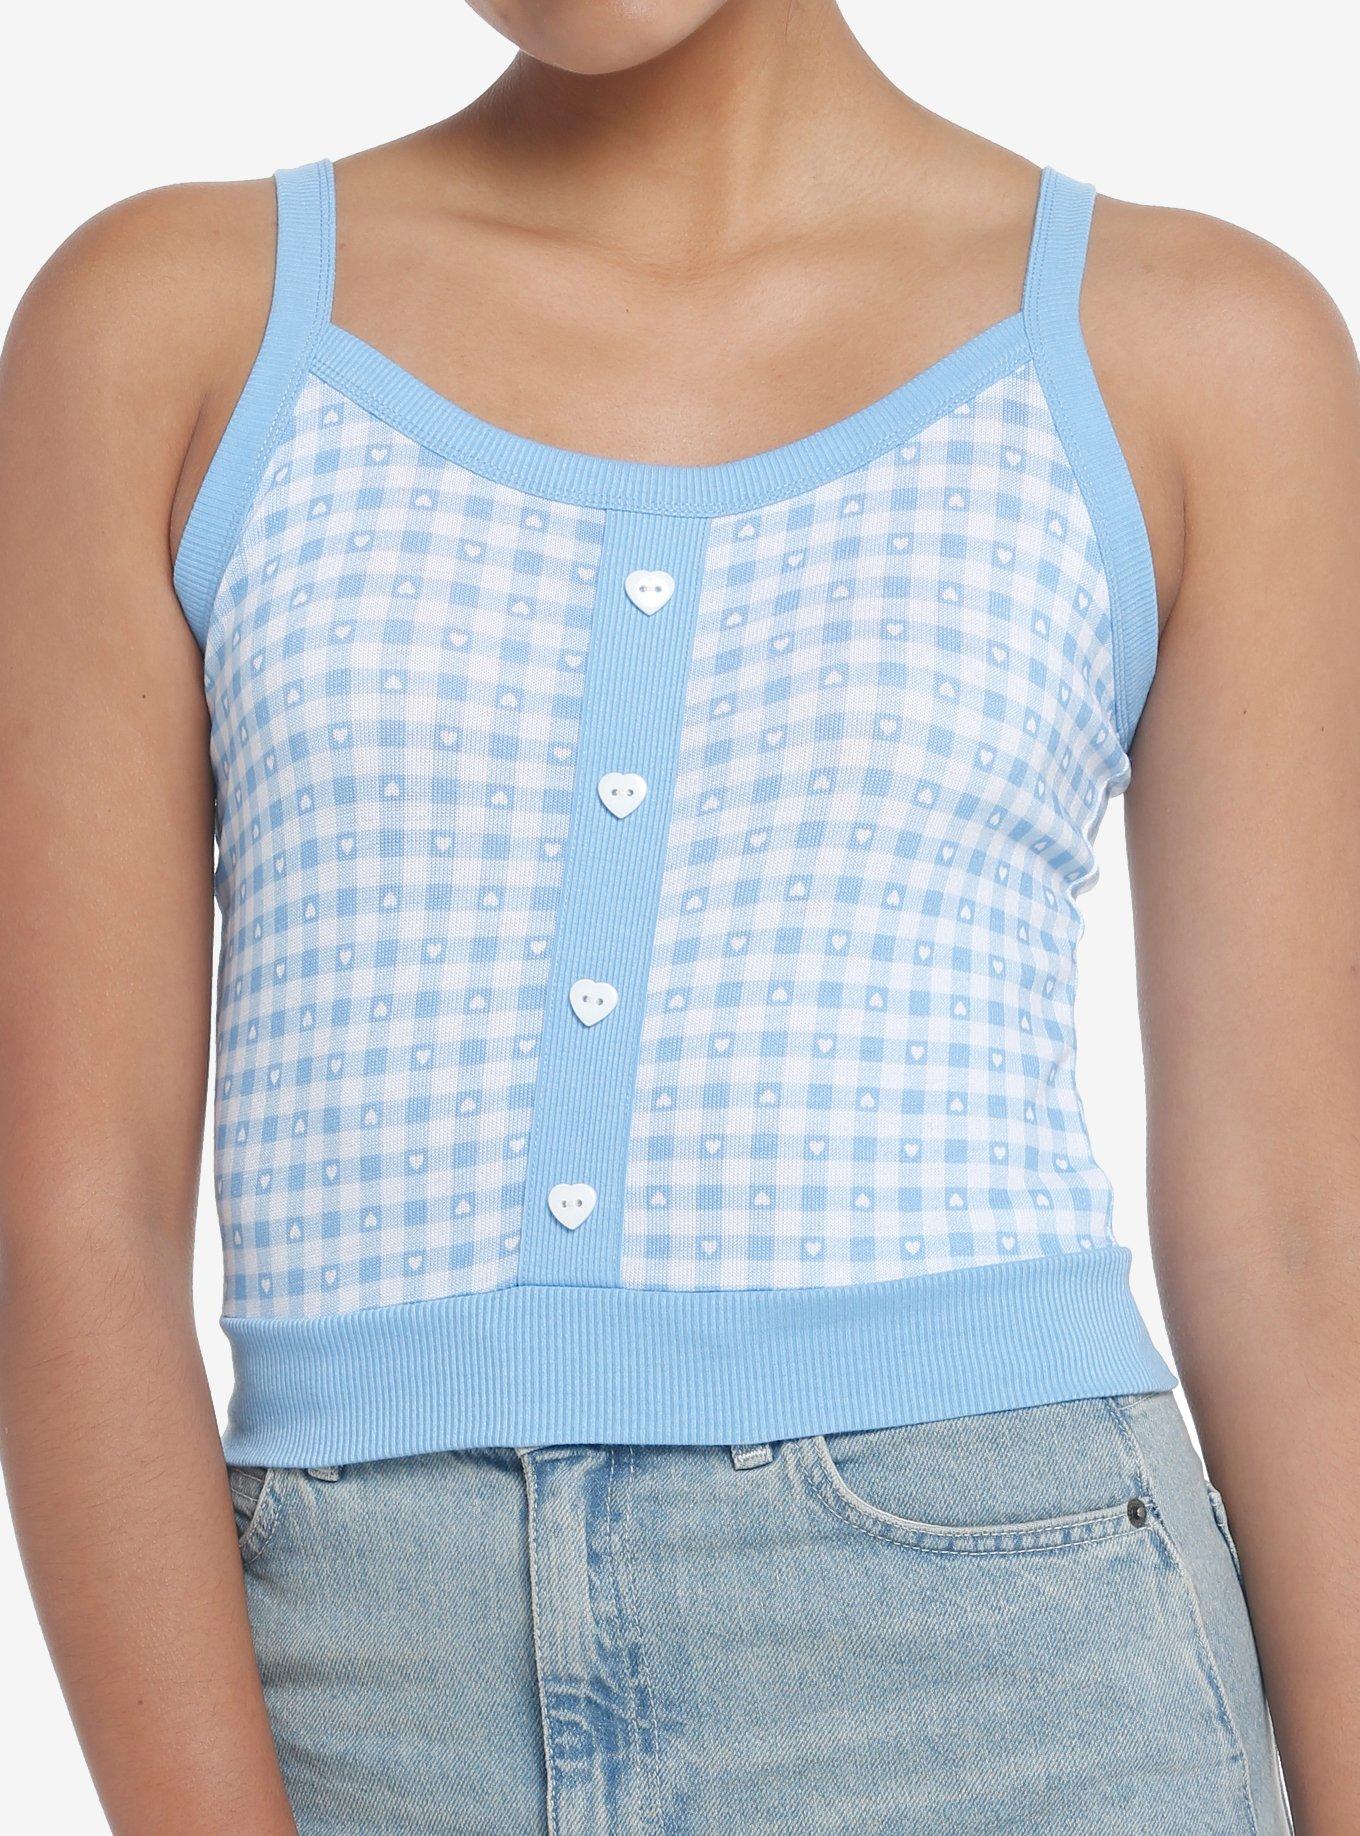 Sweet Society Baby Blue Gingham Girls Sweater Tank Top, GINGHAM WHITE-BLUE, hi-res